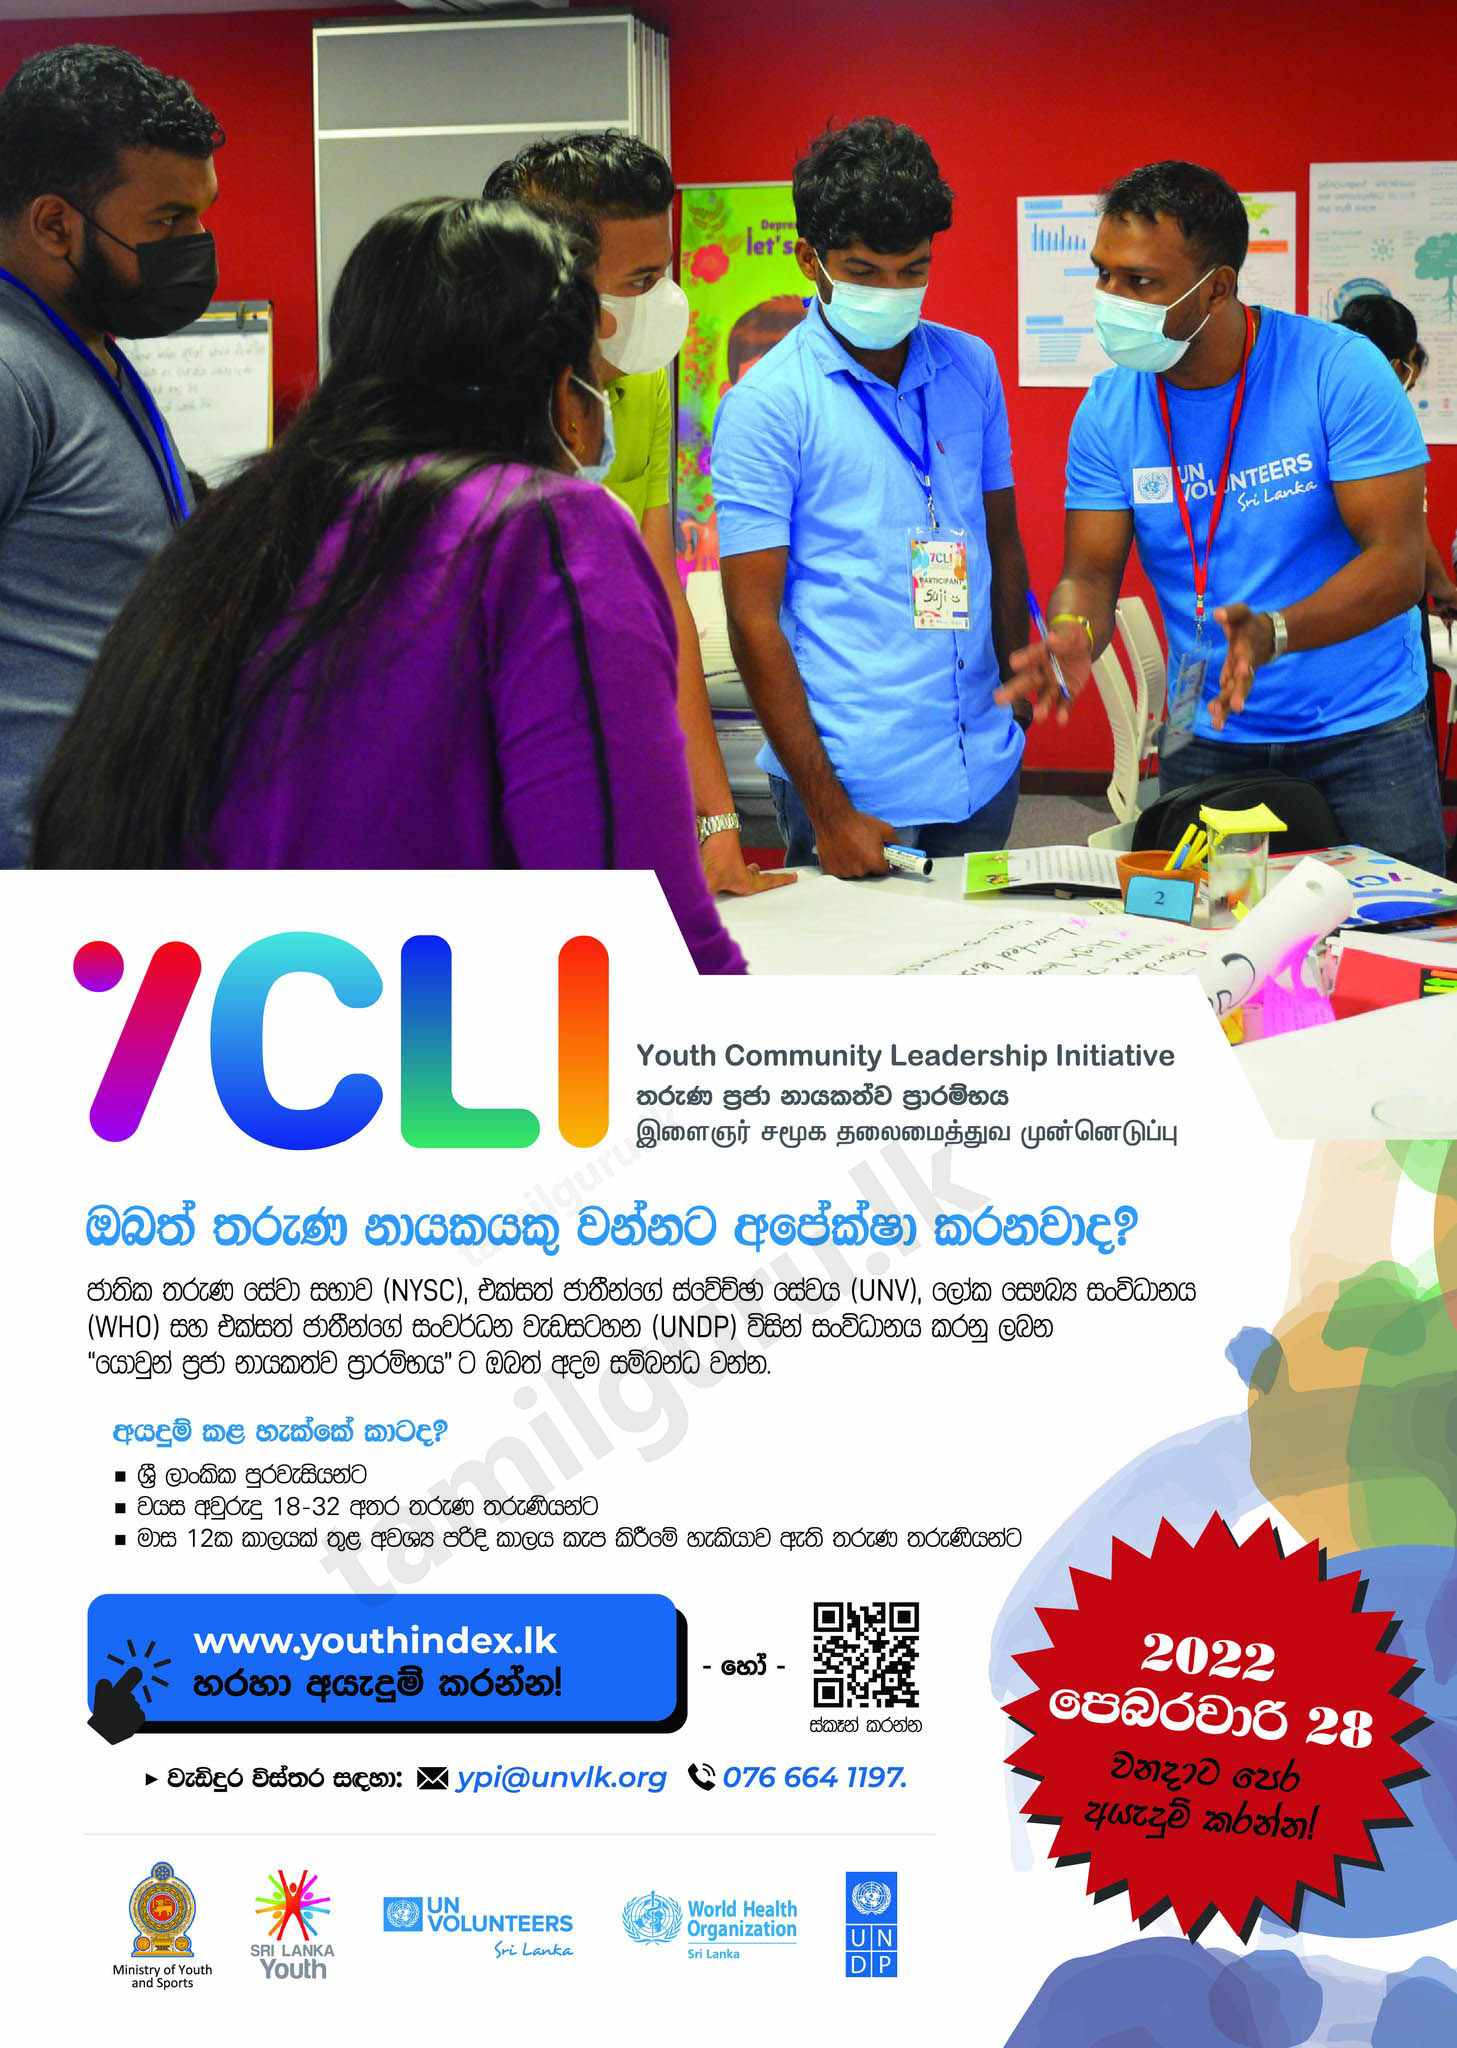 Youth Community Leadership Initiative (Training Programme) - Poster in Sinhala